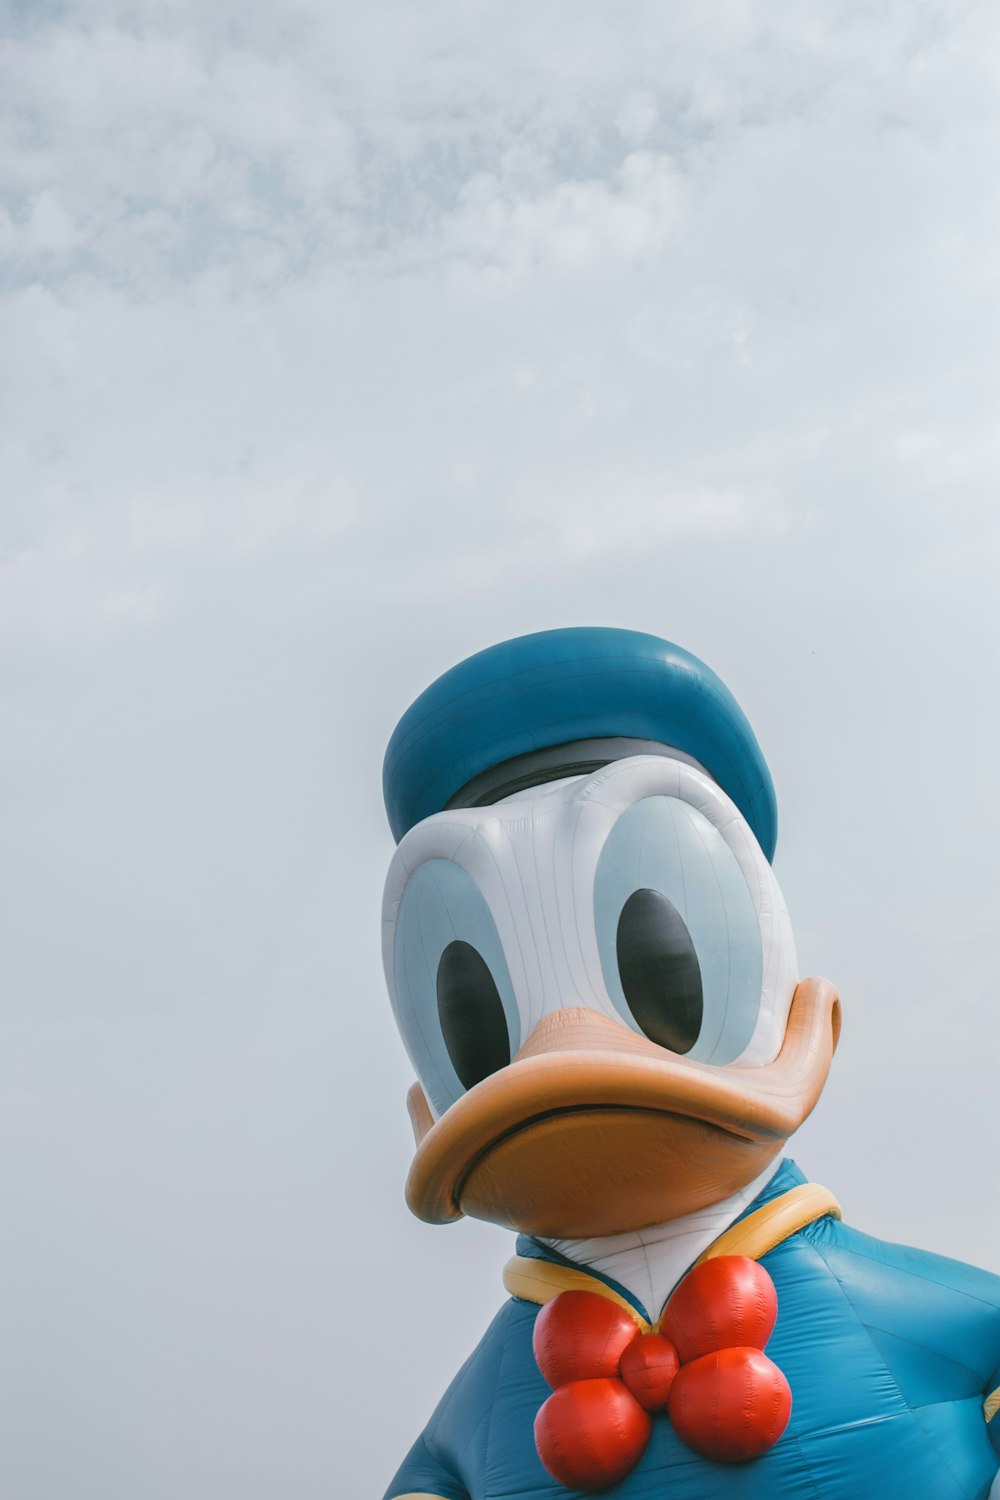 Disney Characters Pictures | Download Free Images on Unsplash